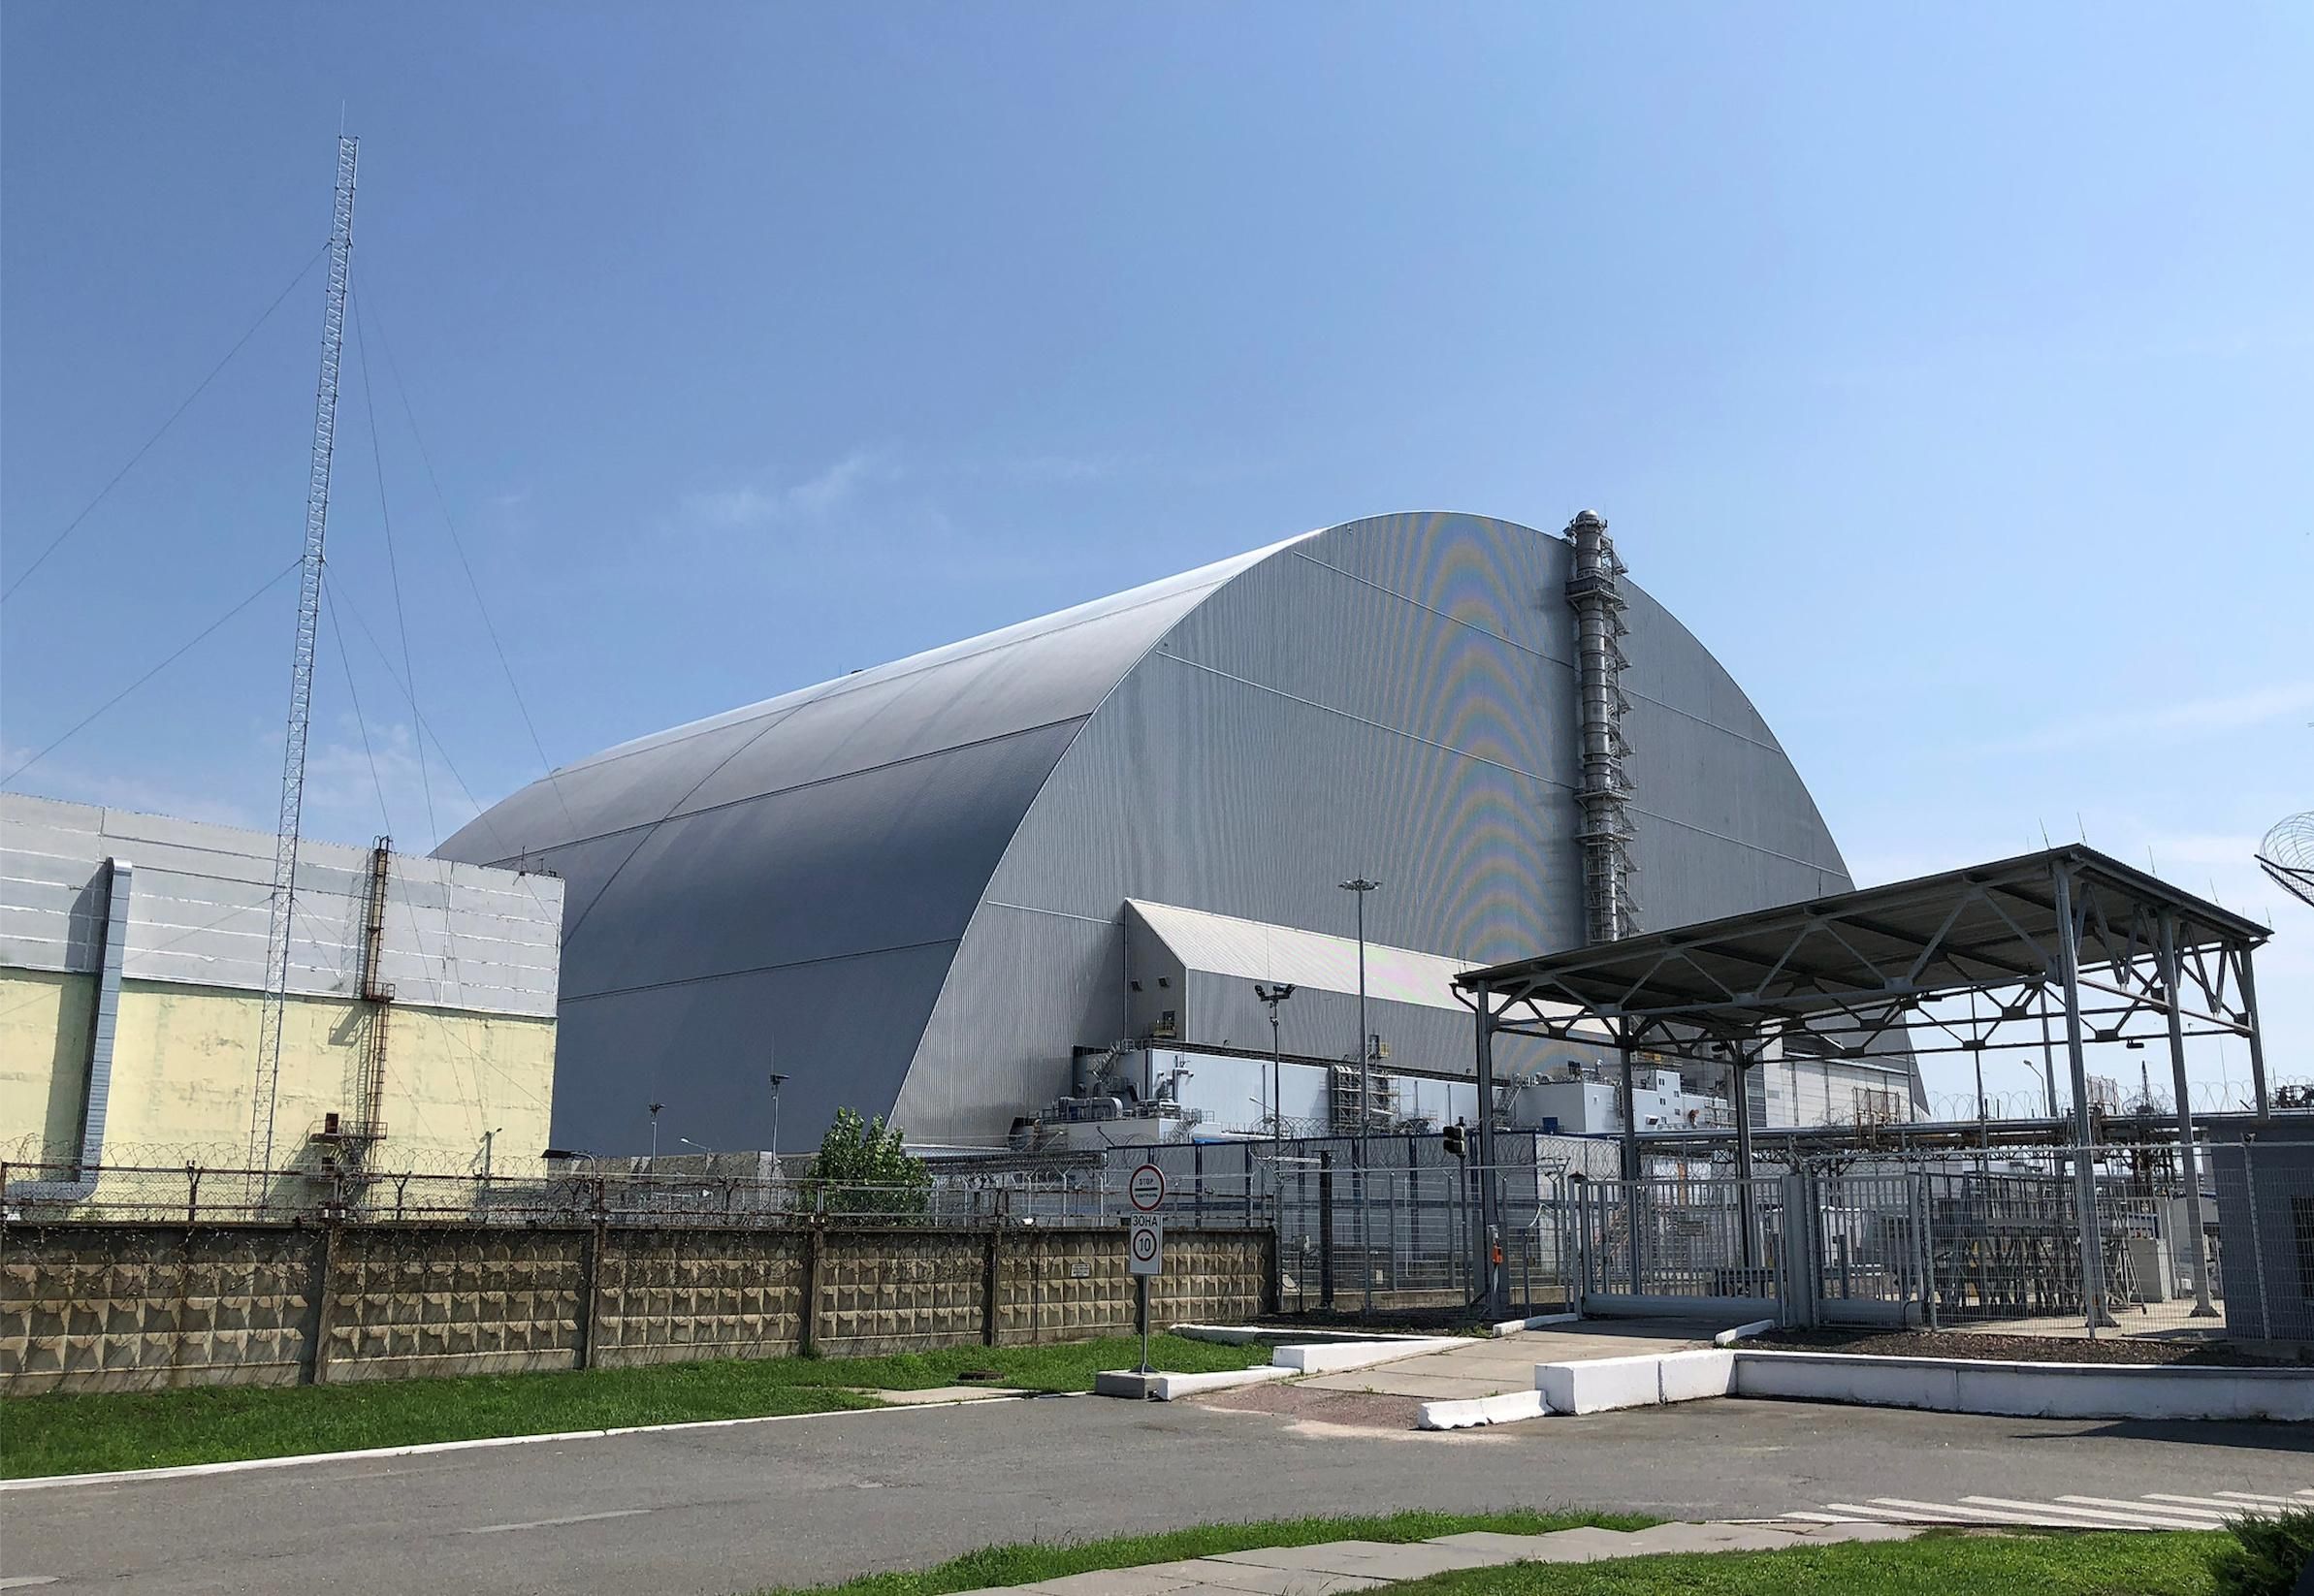 The New Safe Confinement arch over what was once Reactor Four at the Chernobyl nuclear power plant in Ukraine is the world's largest mobile steel structure. (Photo: Clay Gilliland/Flickr/cc)